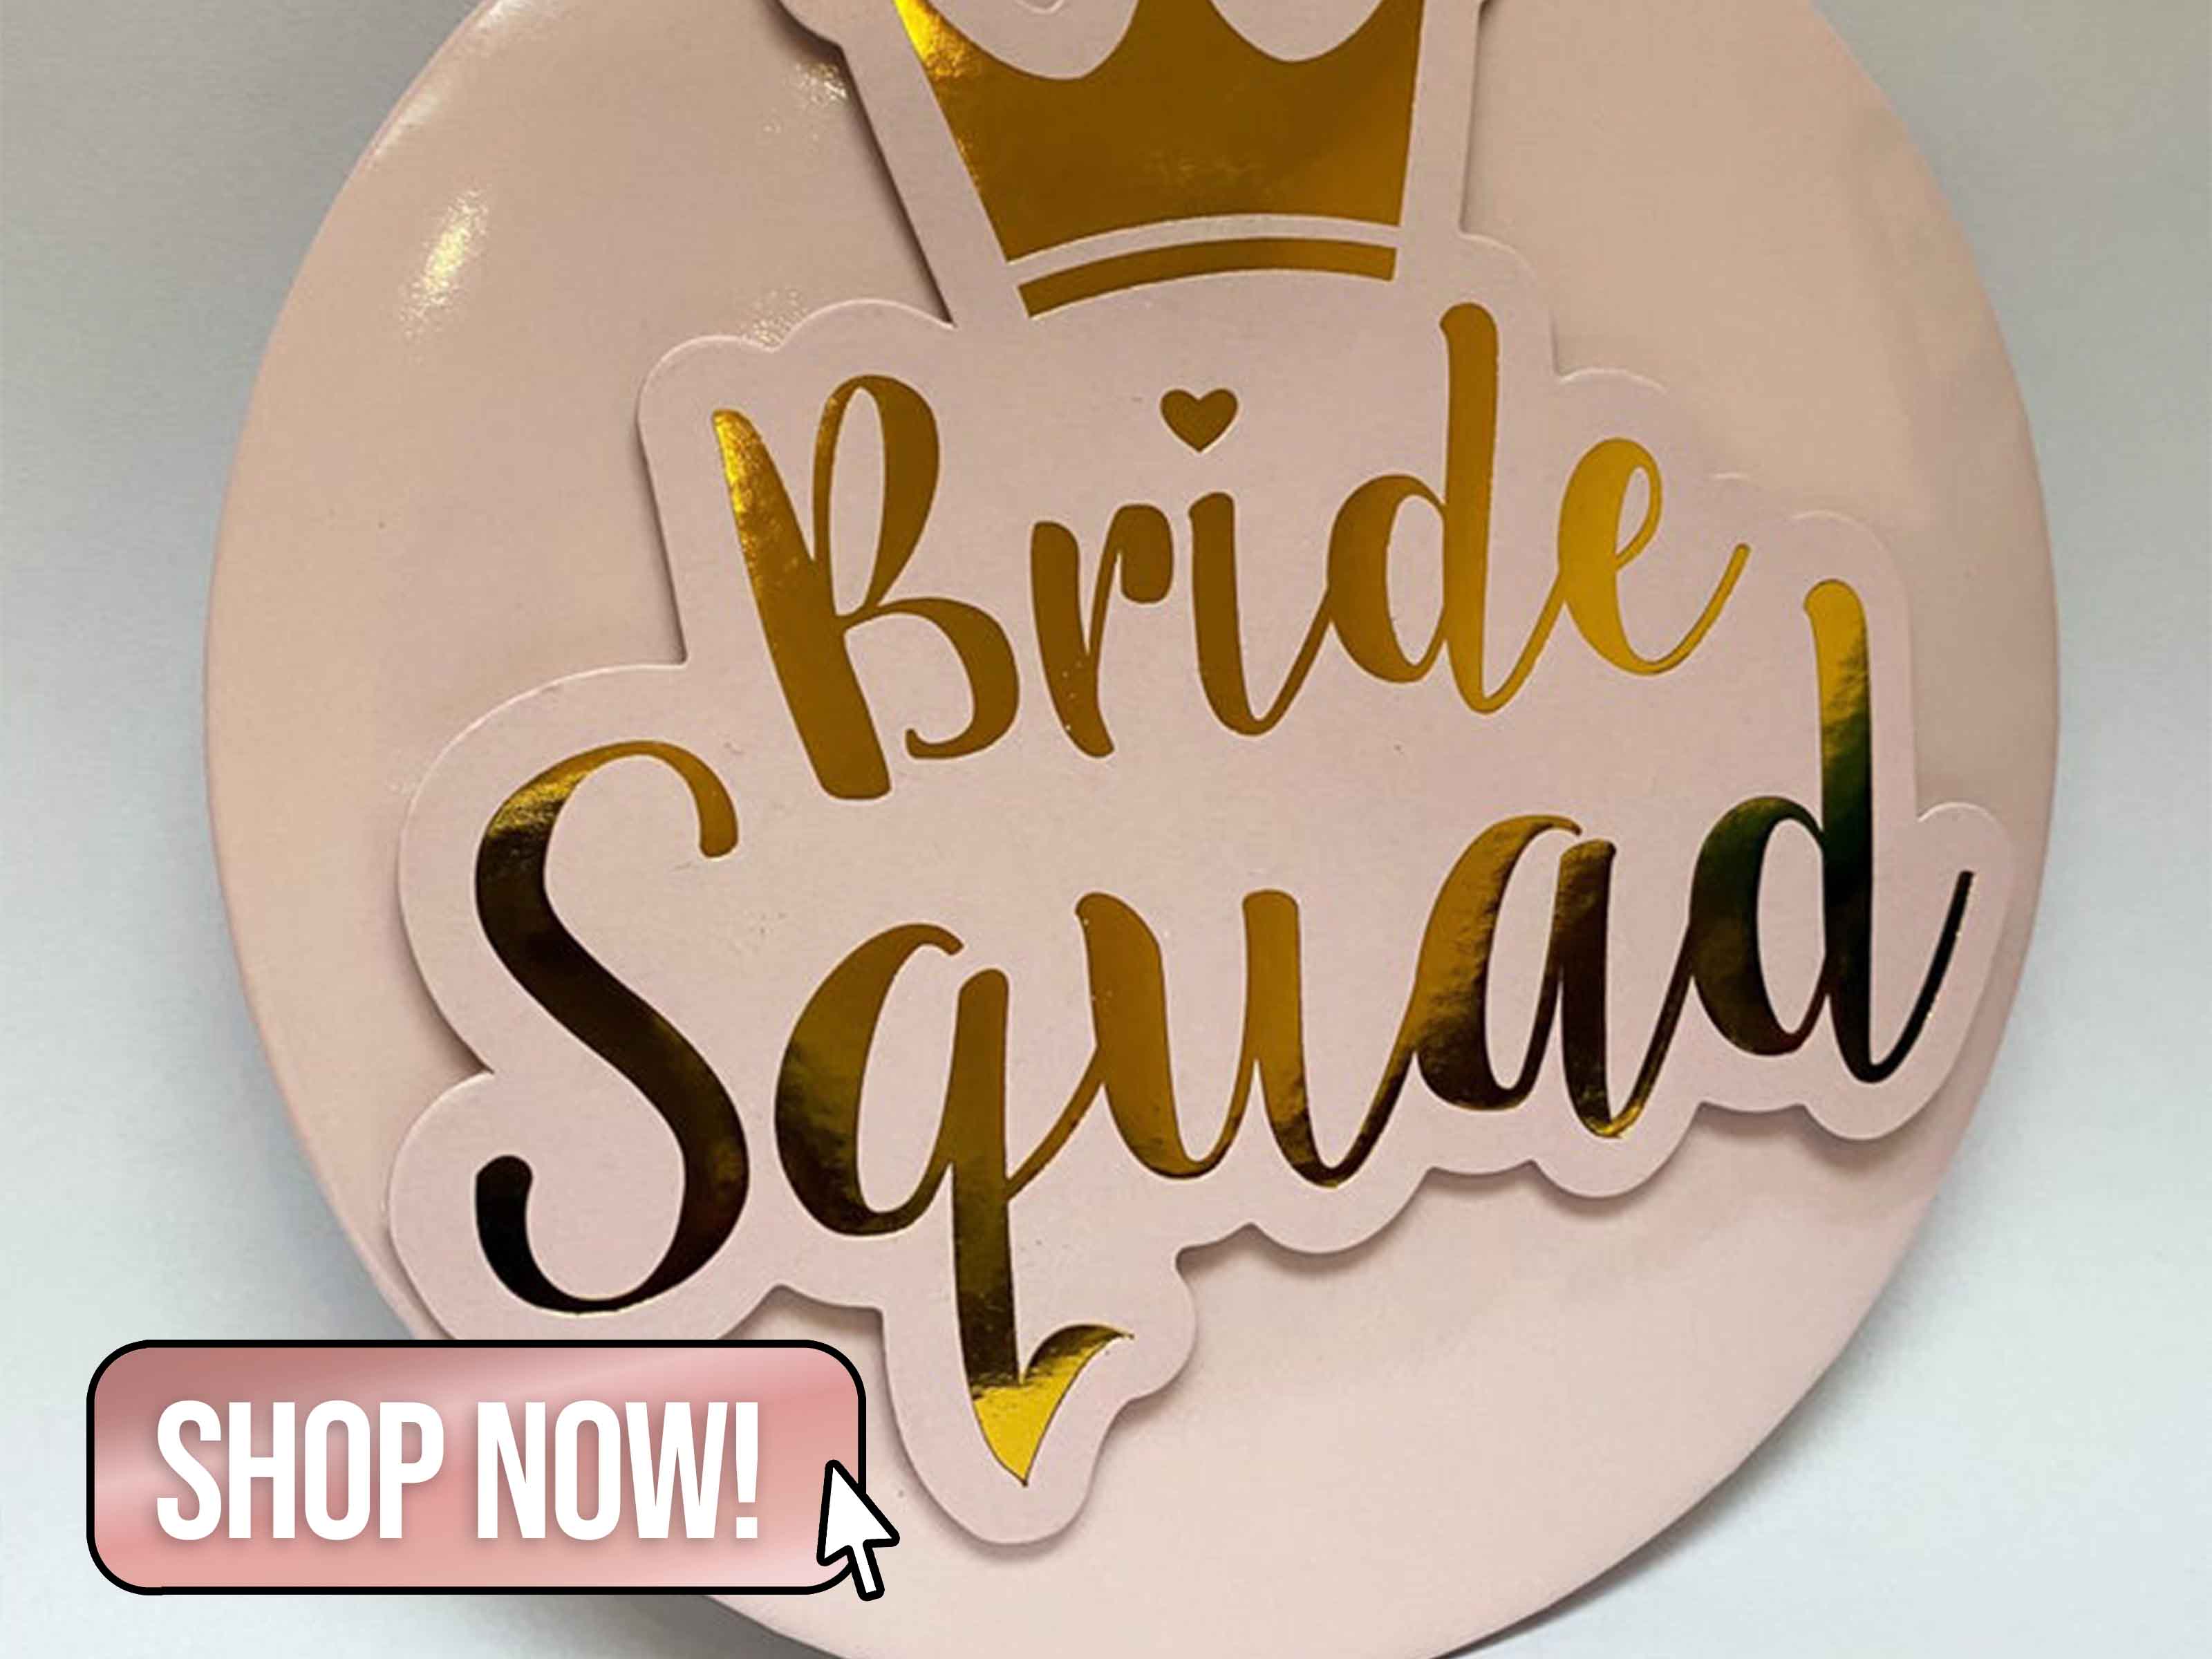 Blush Pink and Gold Bride Squad Badge - FBBespokeEvents